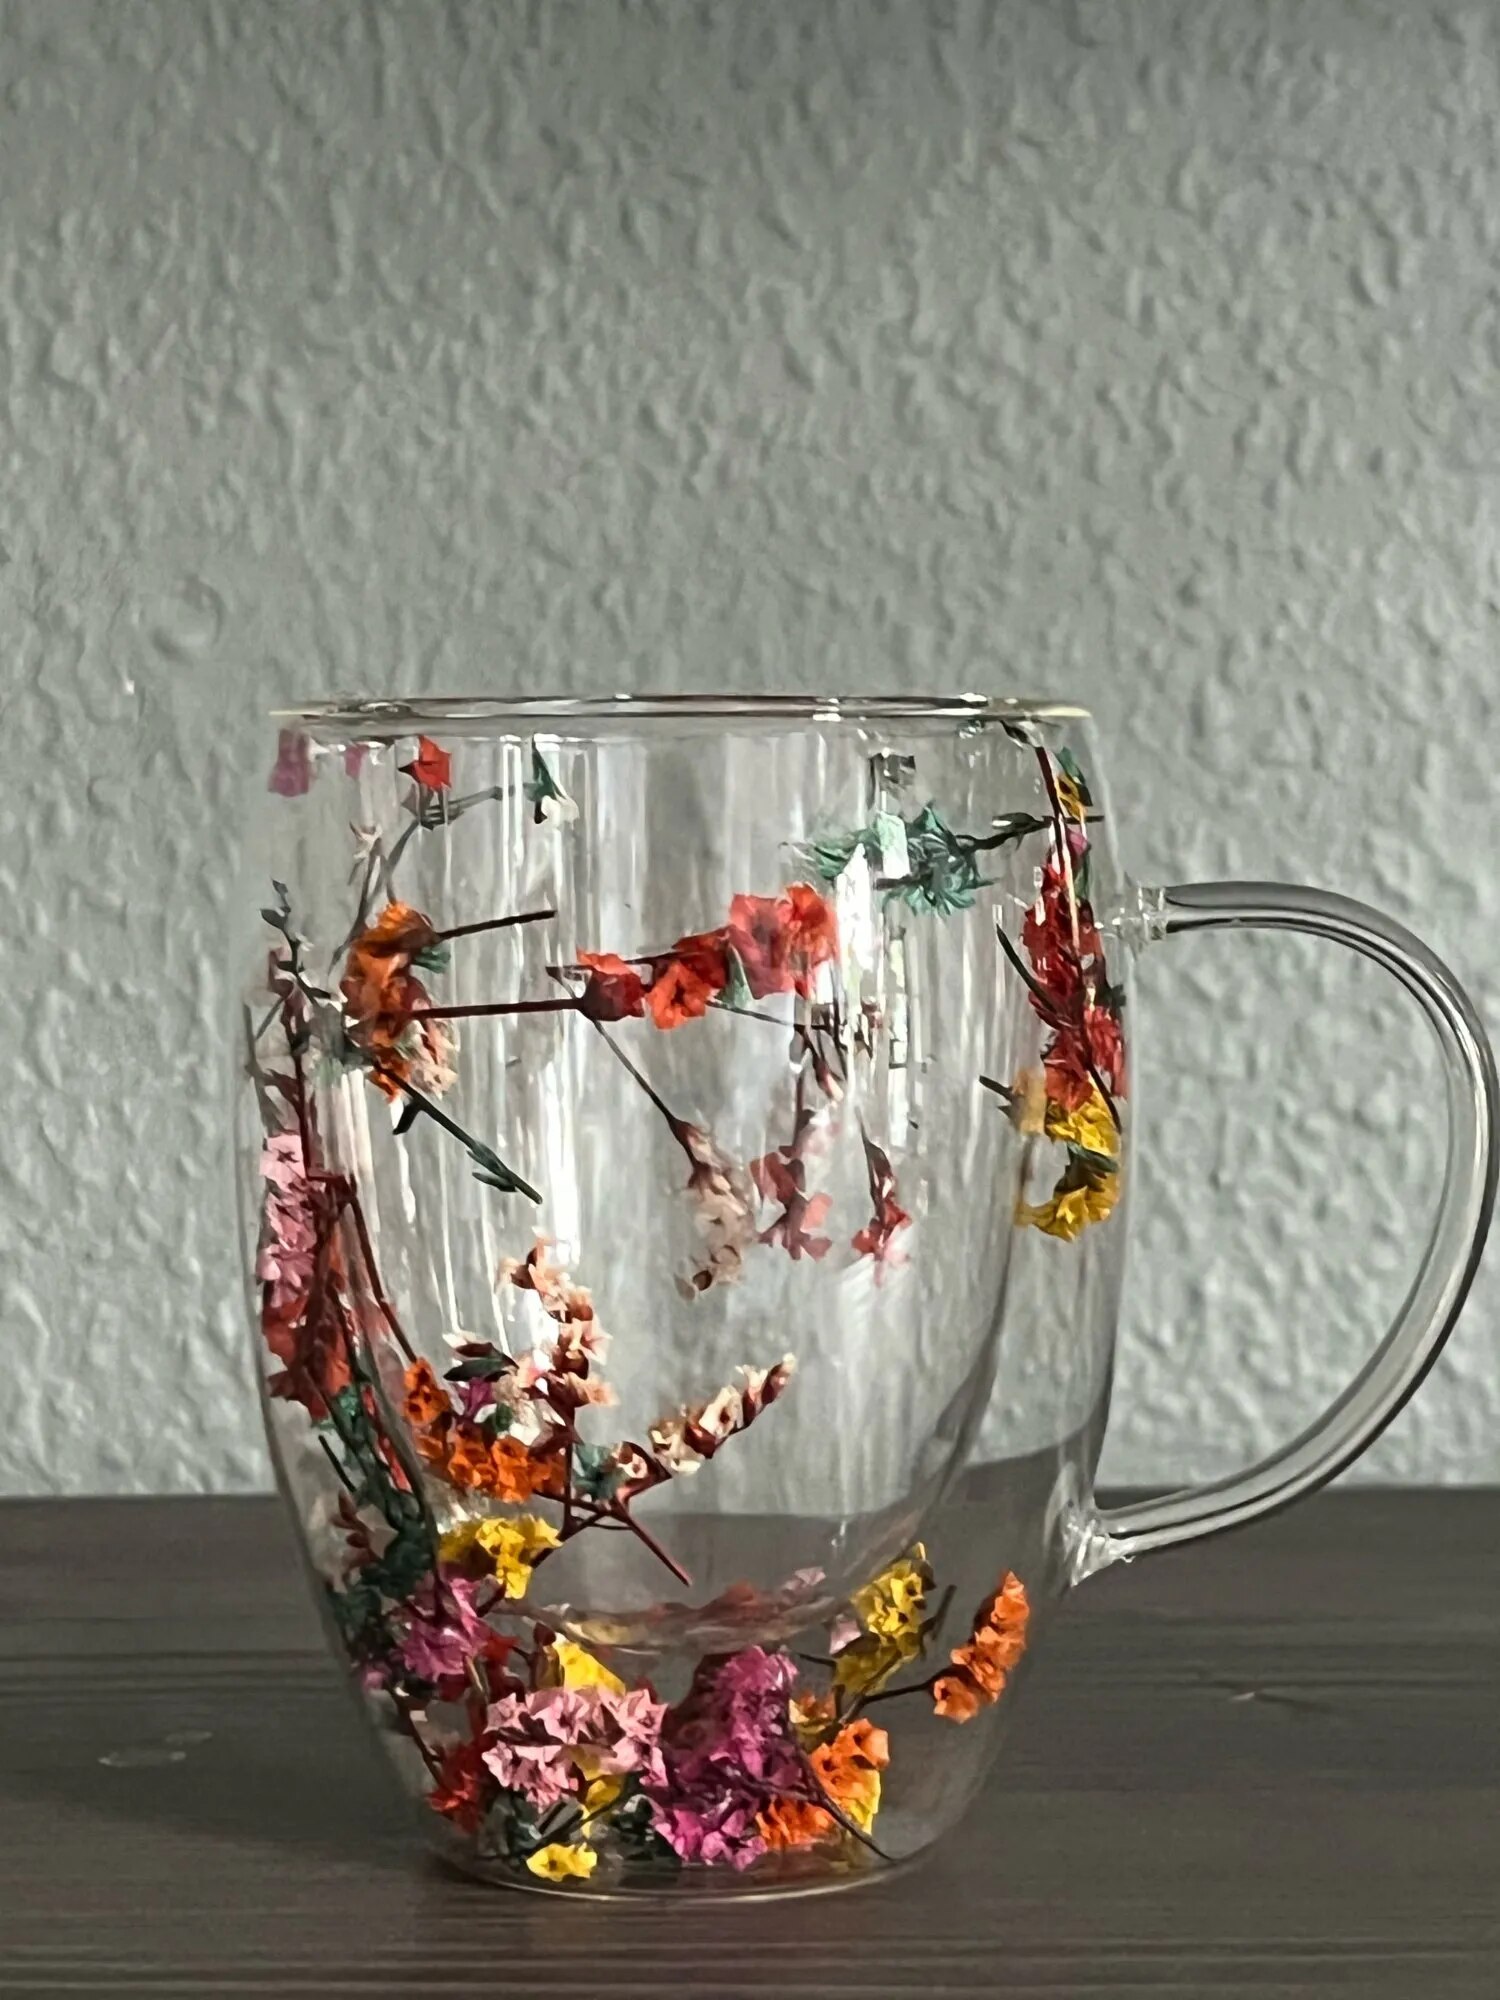 YWDL Dried Flower Double Wall Clear Glass Coffee Mugs Double